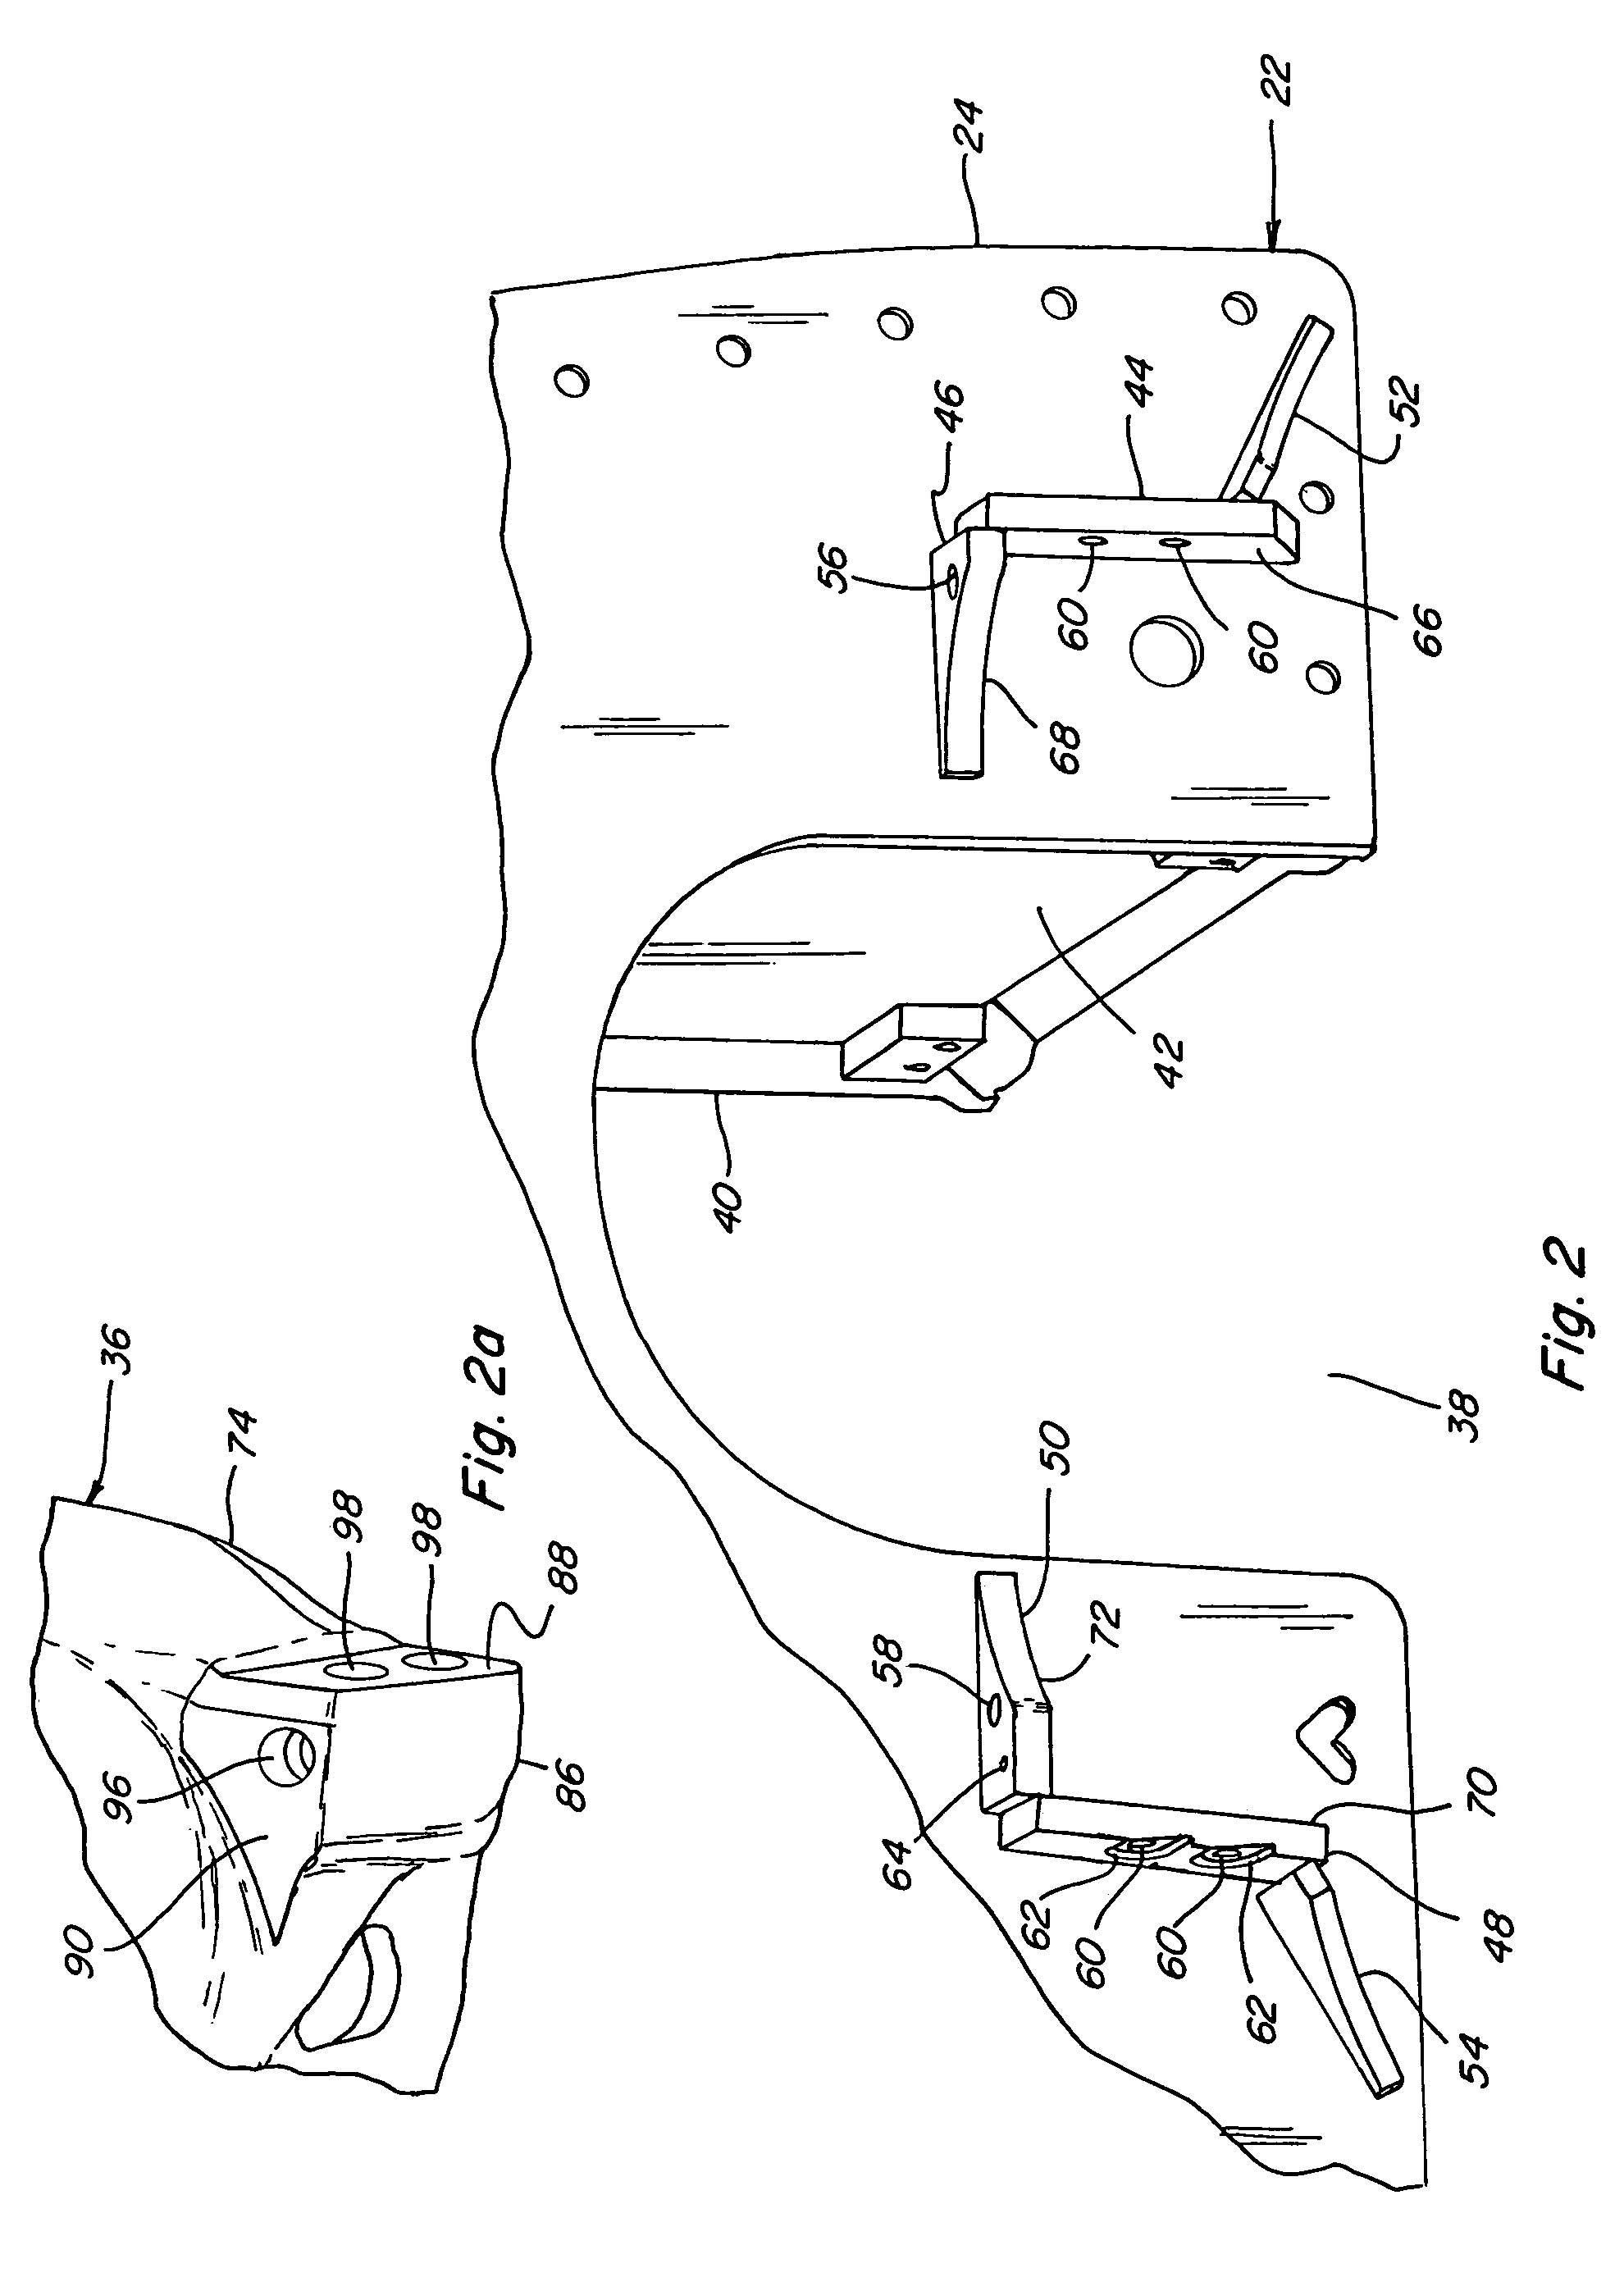 Apparatus and method for reducing shear loading on elements connecting an axle and a chassis of a vehicle